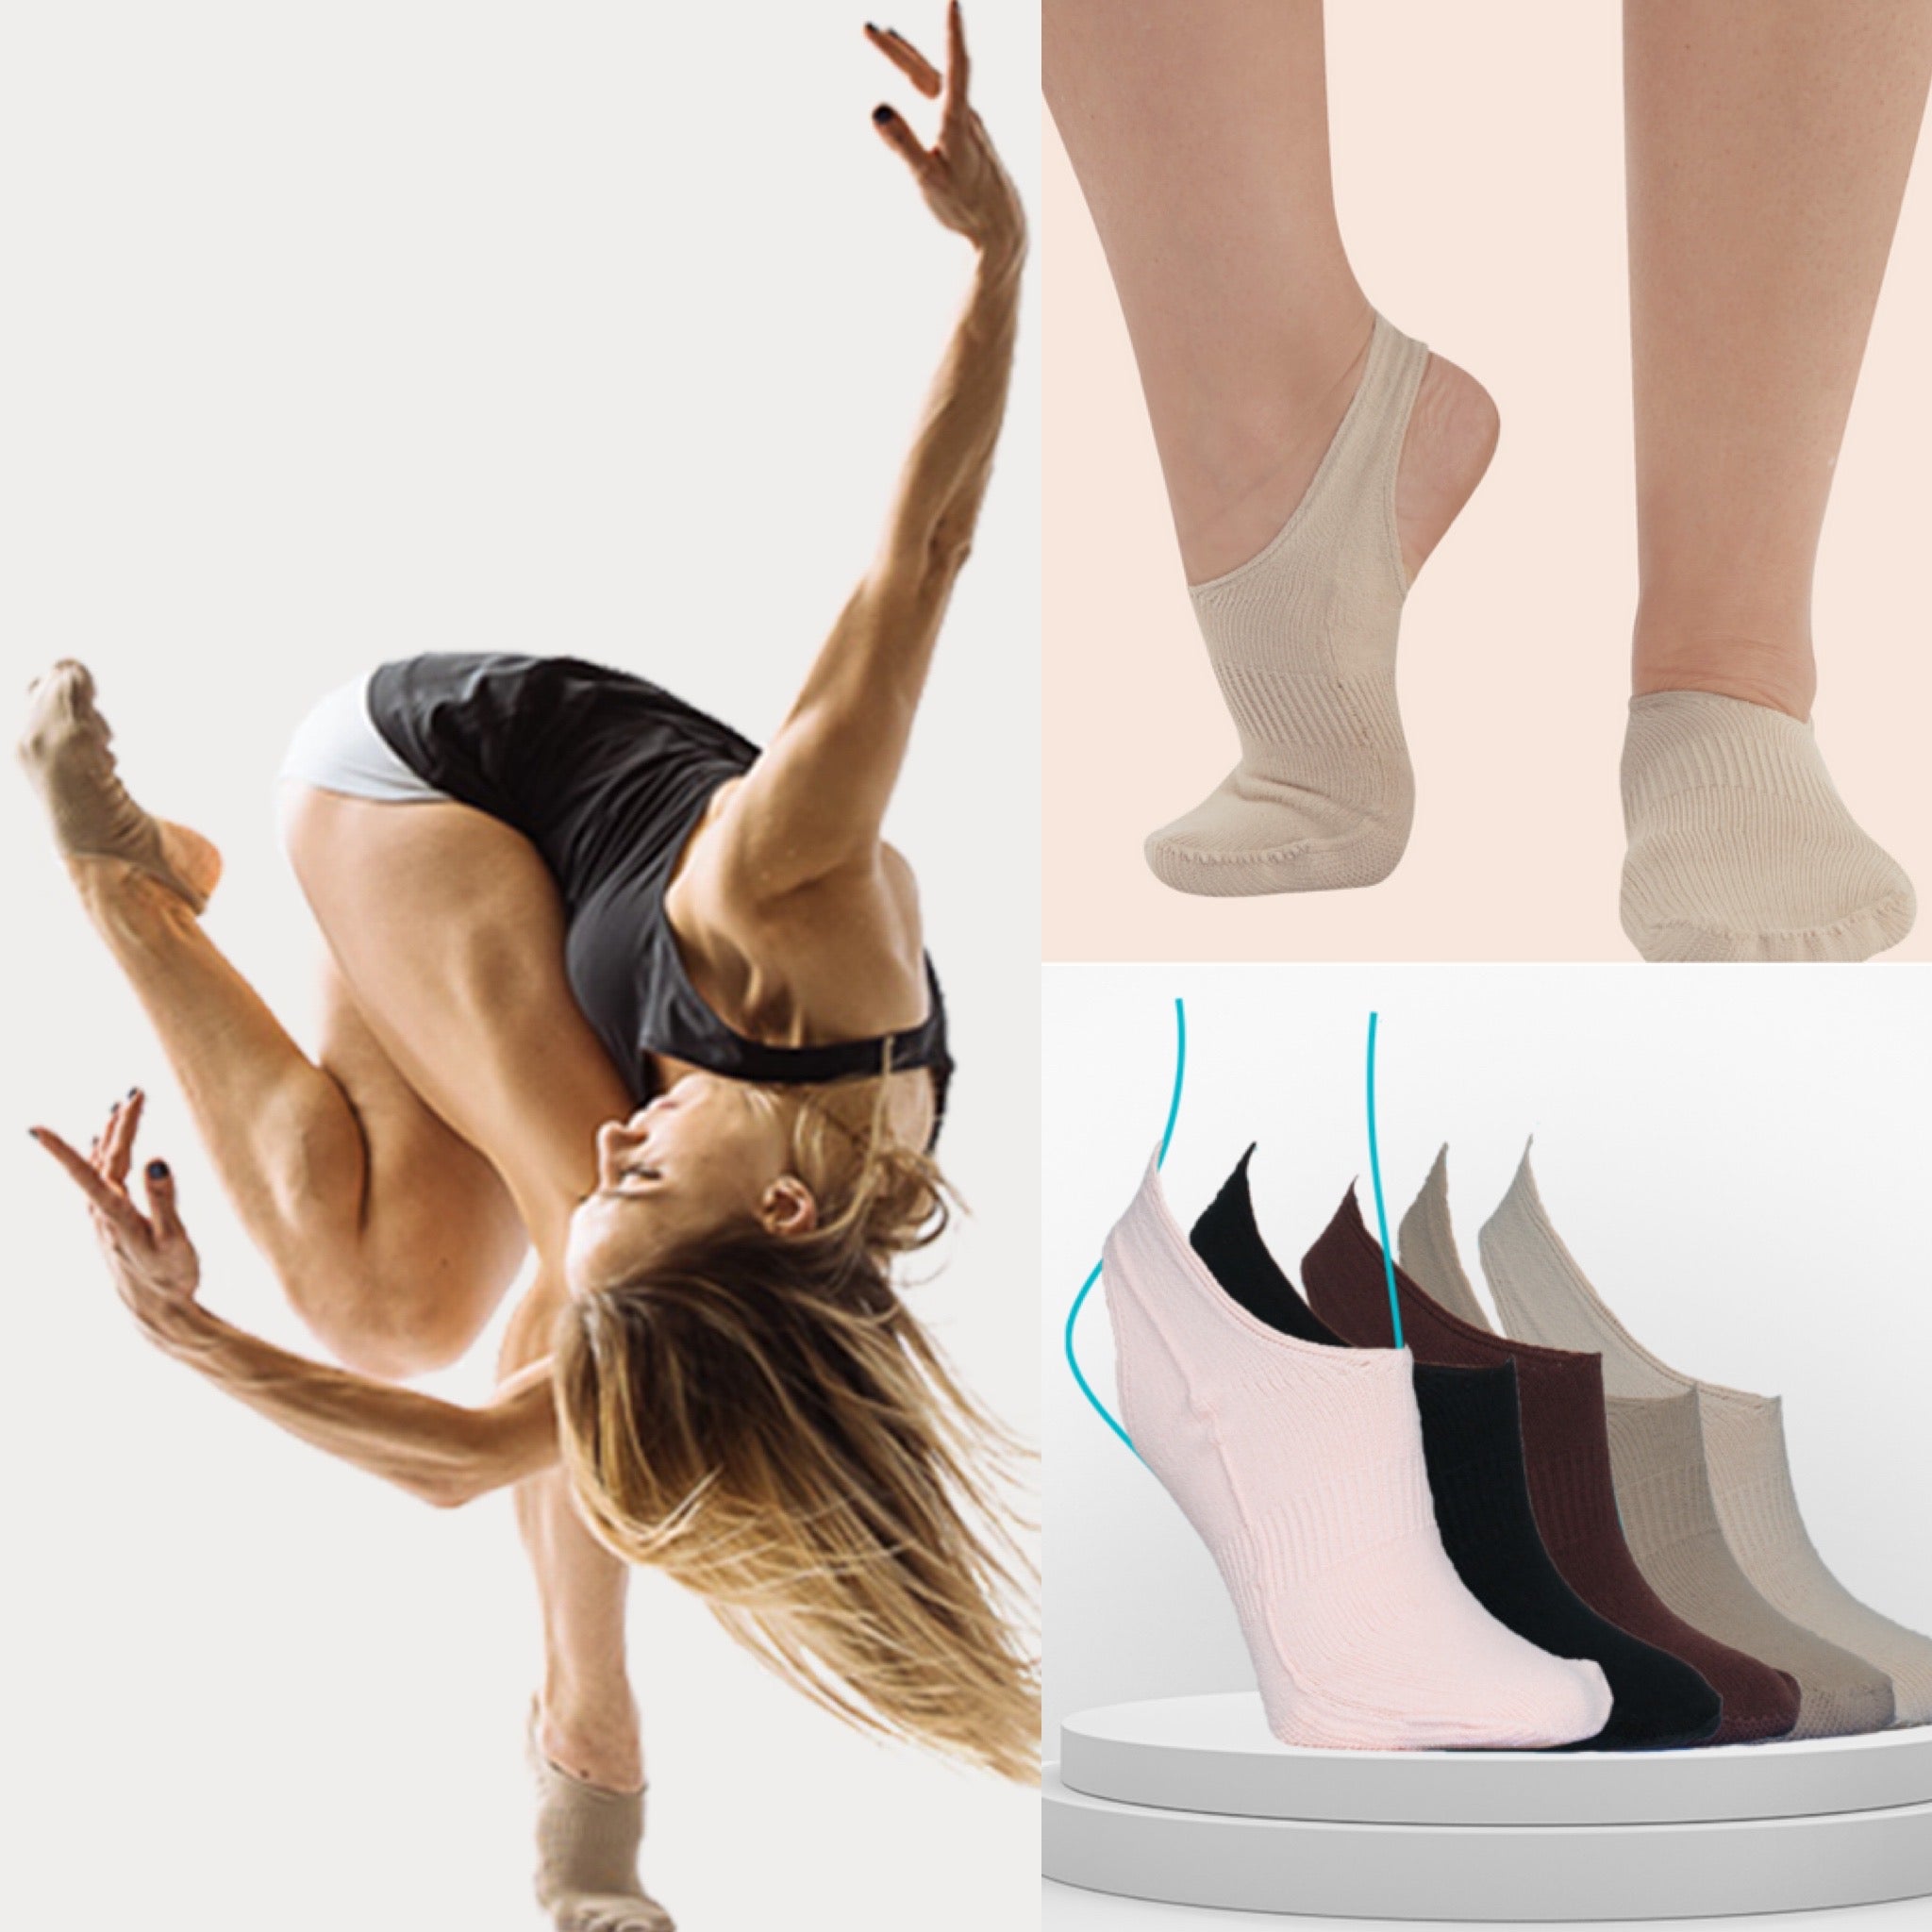 The Apolla Alpha compression socks is a great addition to your collection  #PointeShoes #BalletTips 